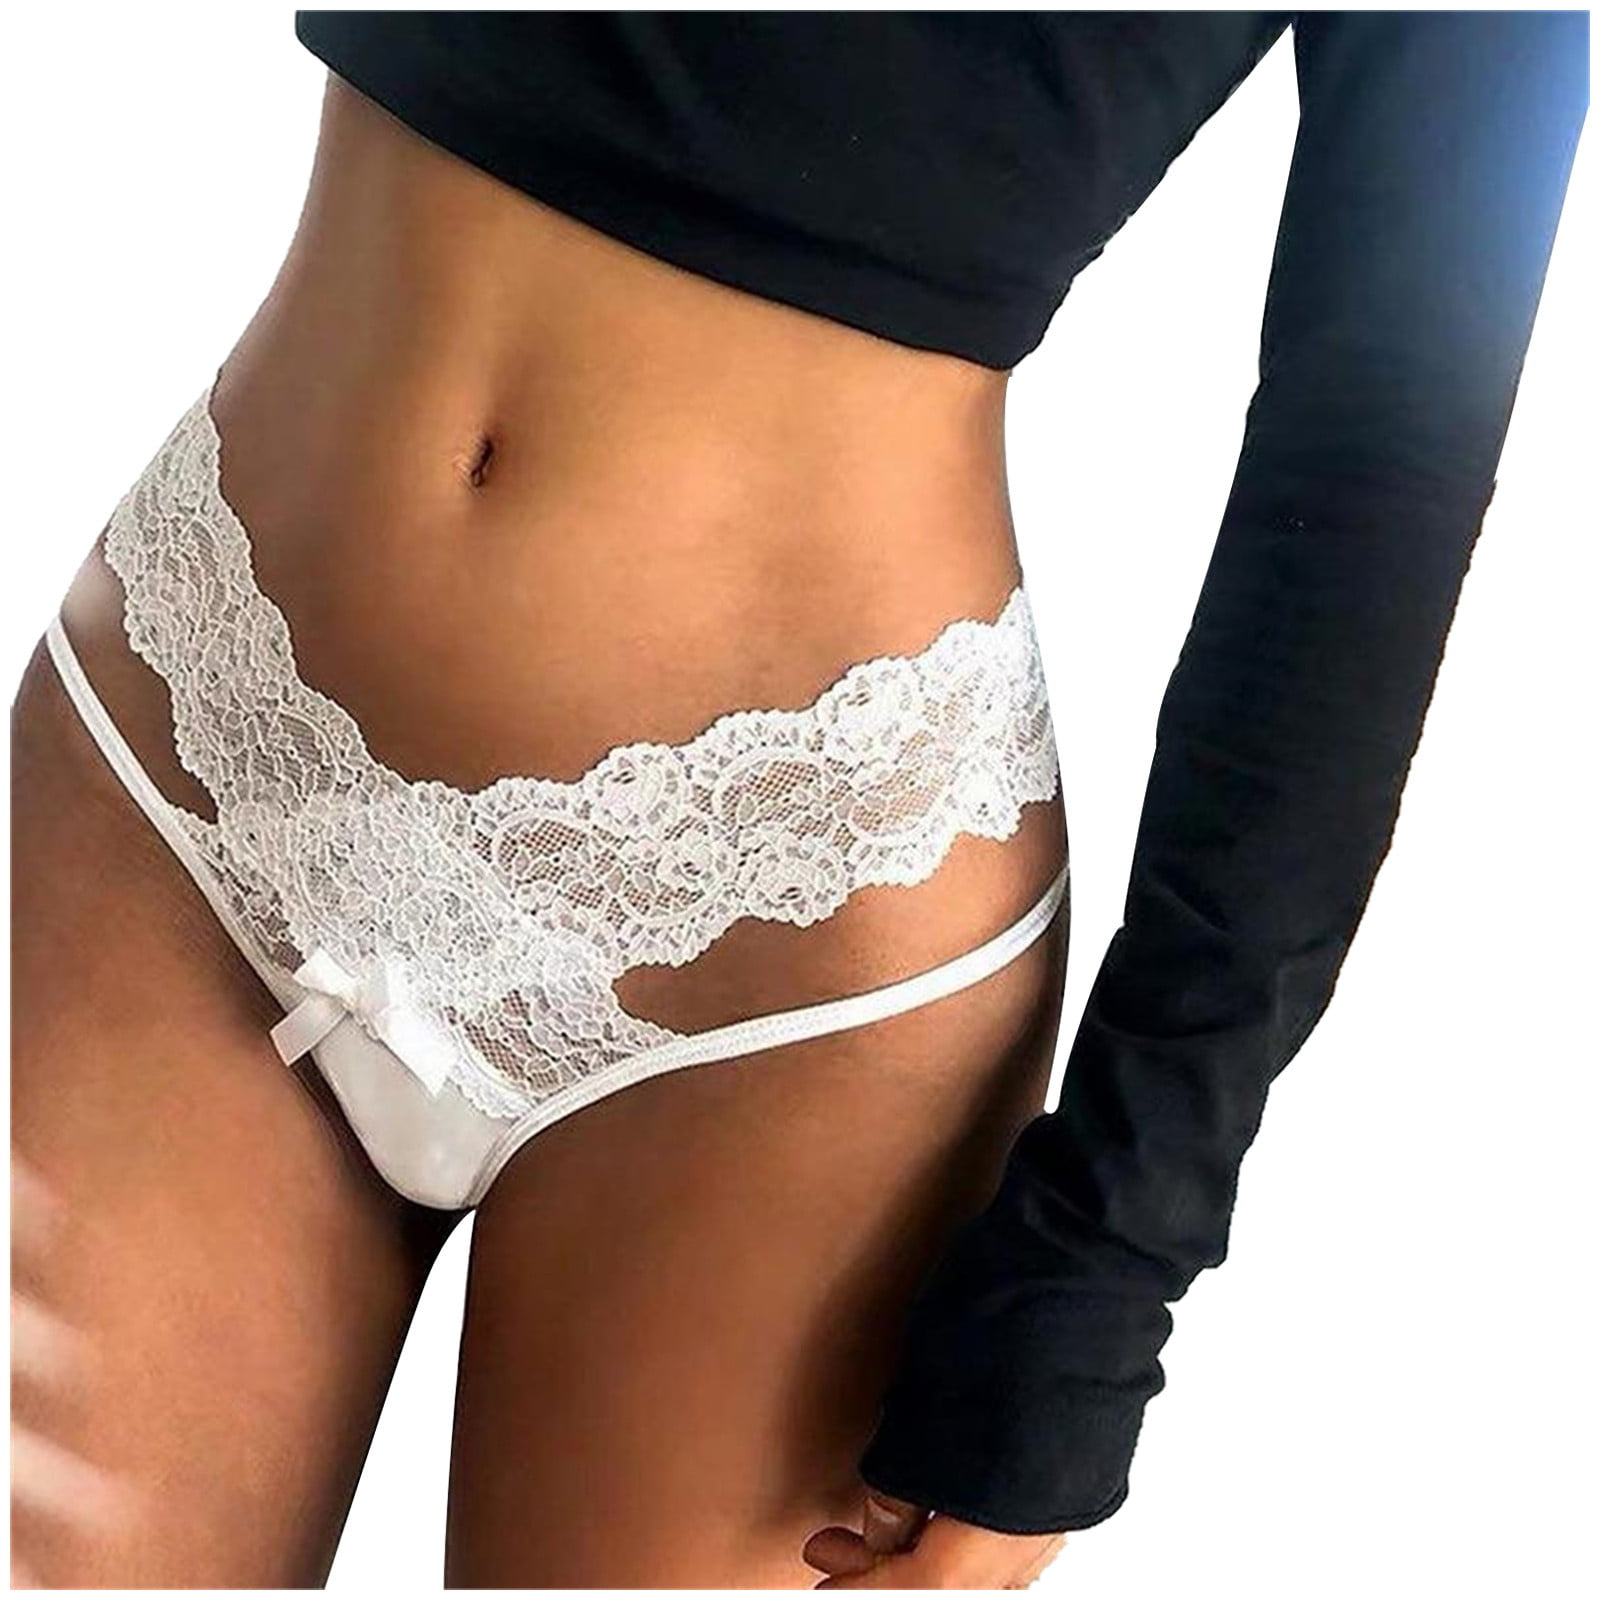 Guzom Underwear for Women Lace G-String Thongs Lace High Cut Tanga Cheeky  Low Rise Hipster Briefs- White Size M 